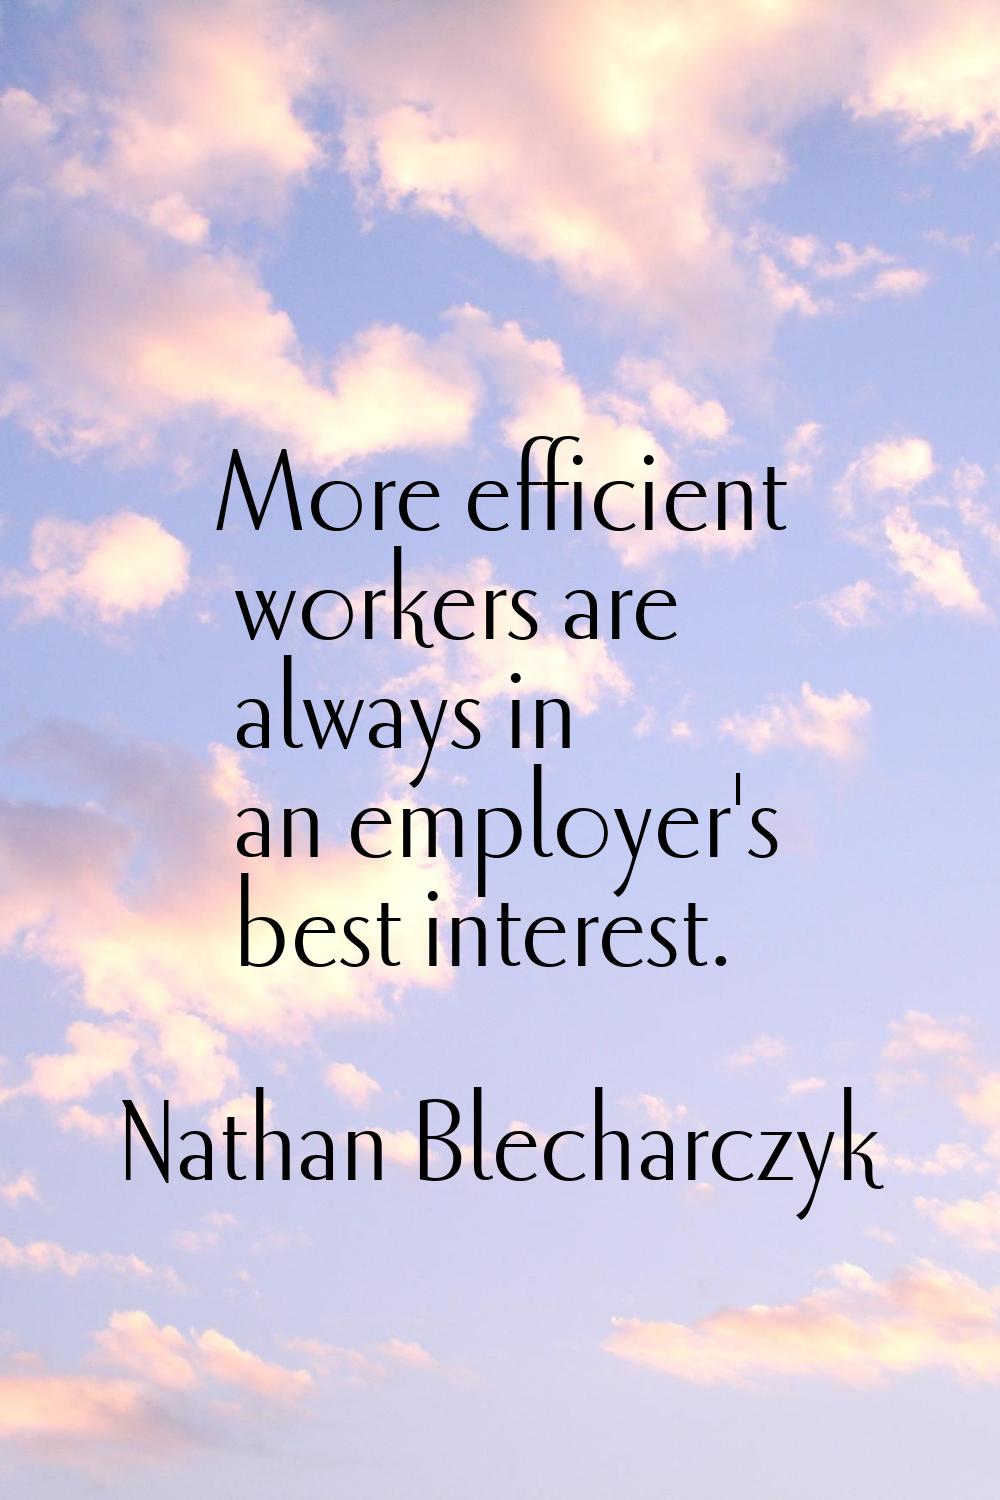 More efficient workers are always in an employer's best interest.